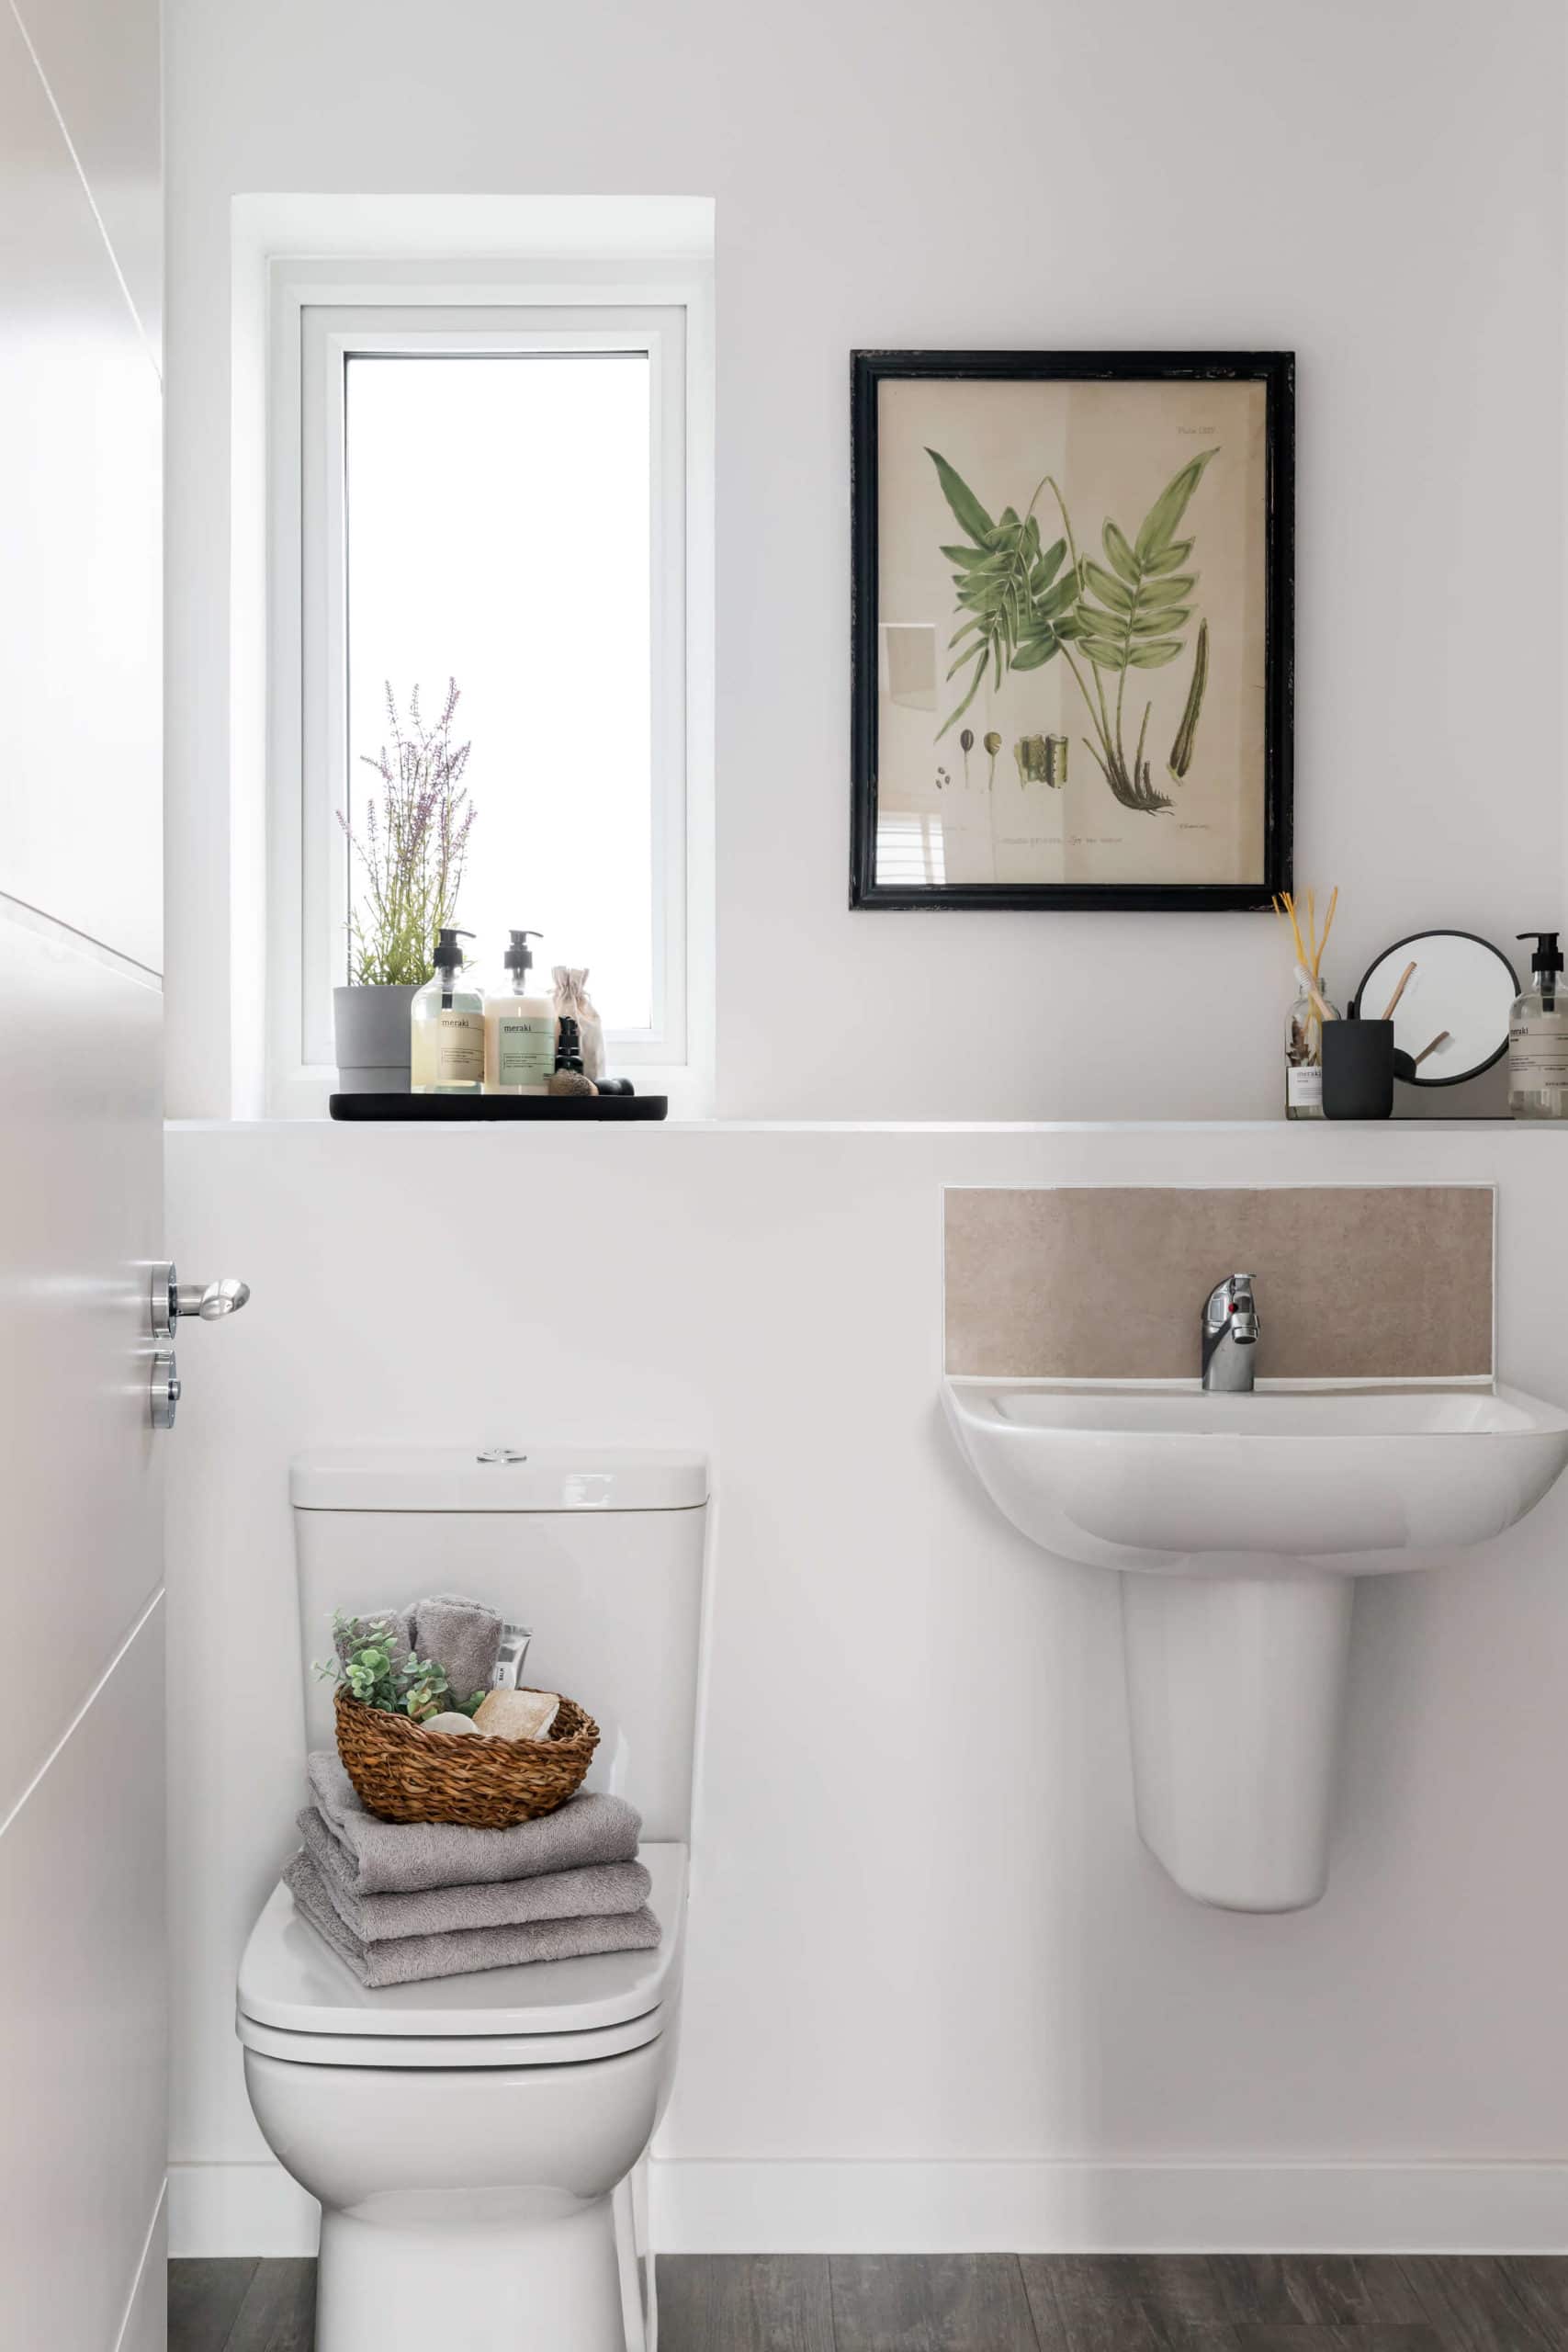 Bathroom with plants and nature-inspired artwork